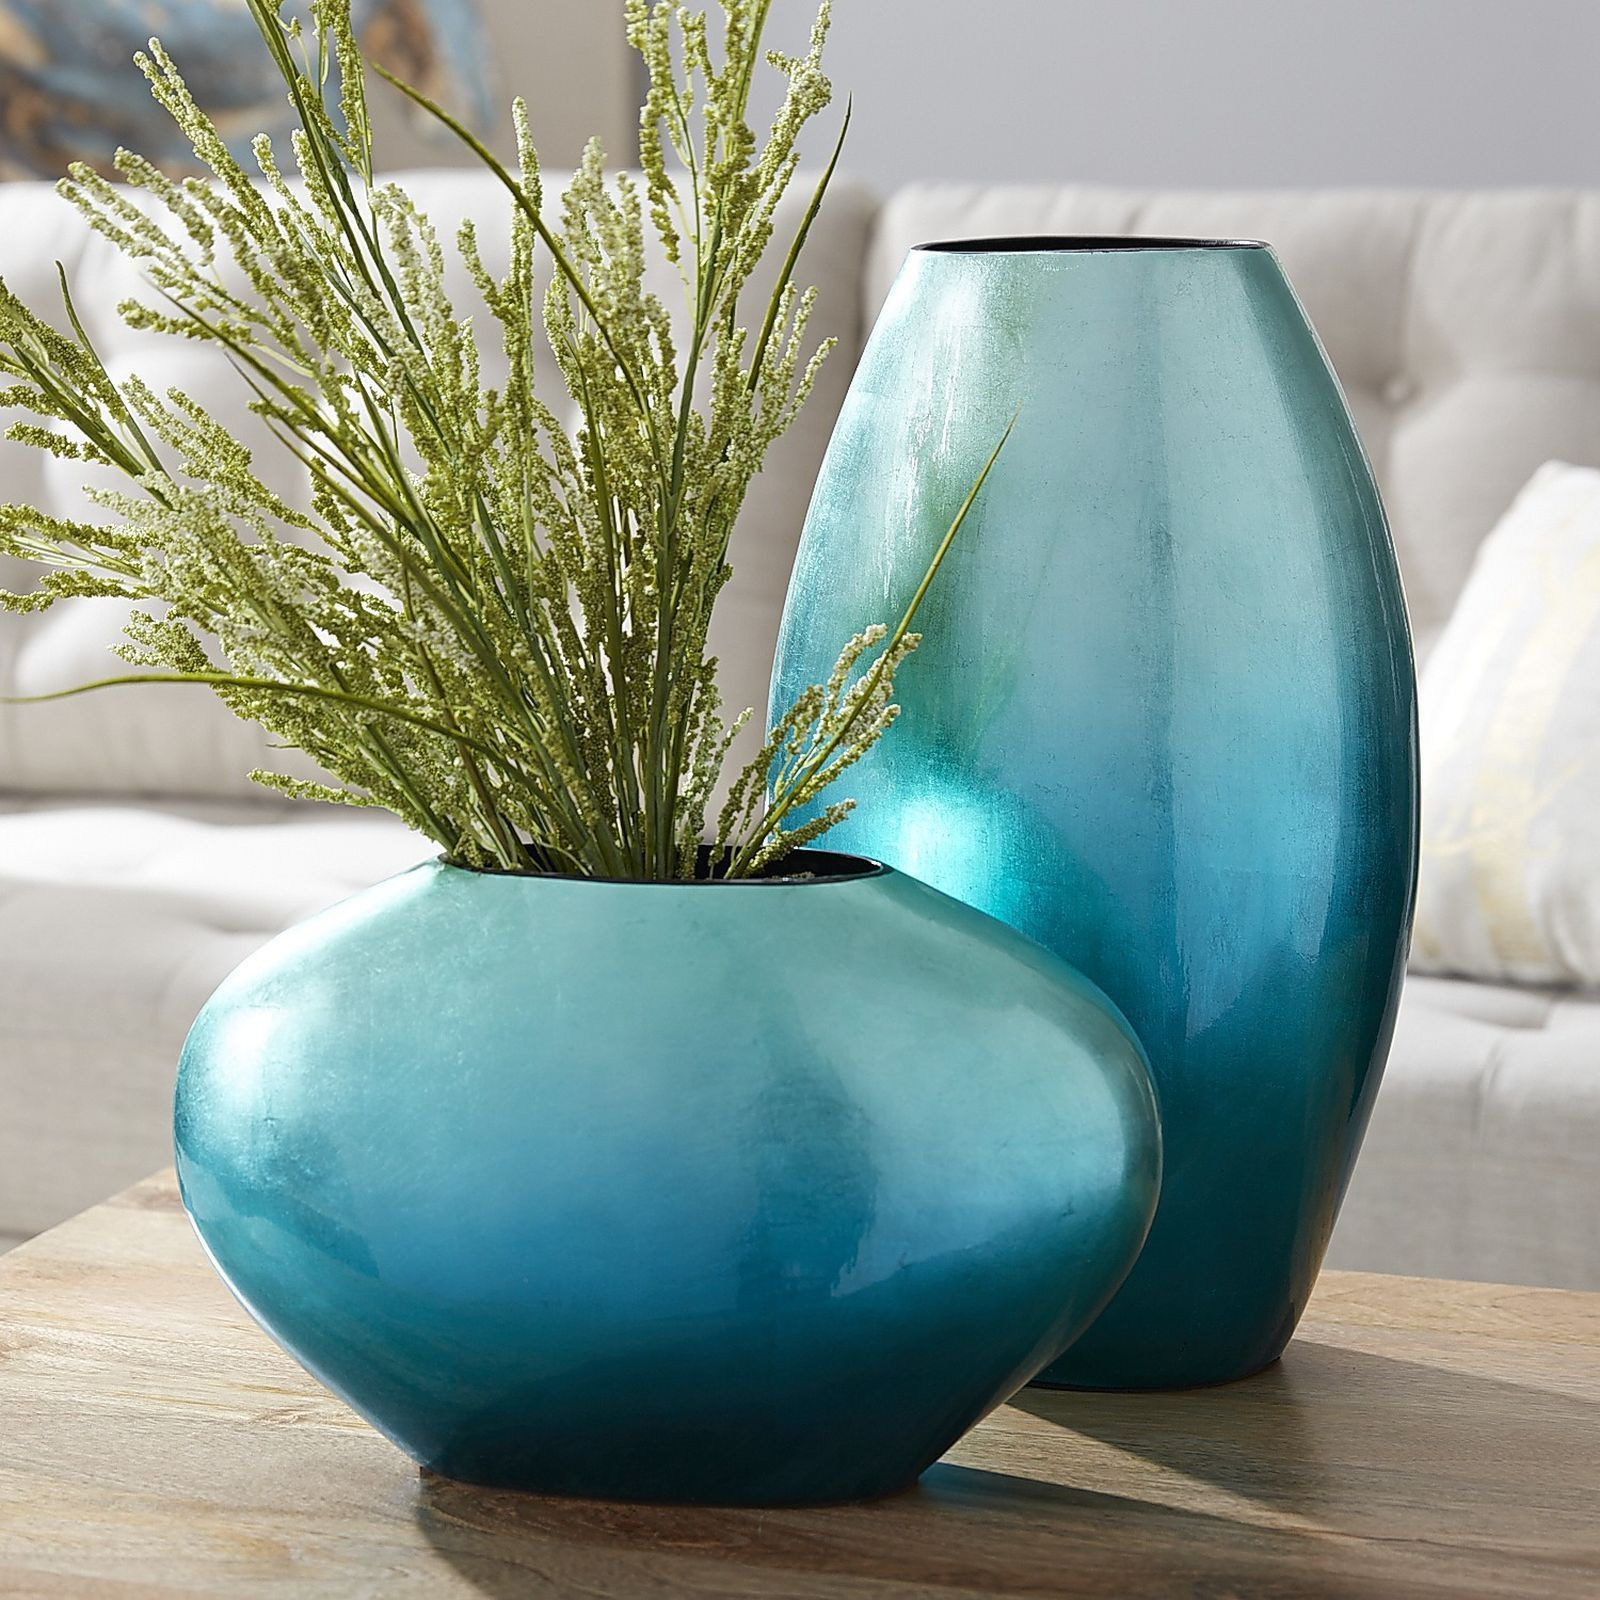 25 Trendy Small Teal Vase 2024 free download small teal vase of 37 fenton blue glass vase the weekly world intended for 37 fenton blue glass vase